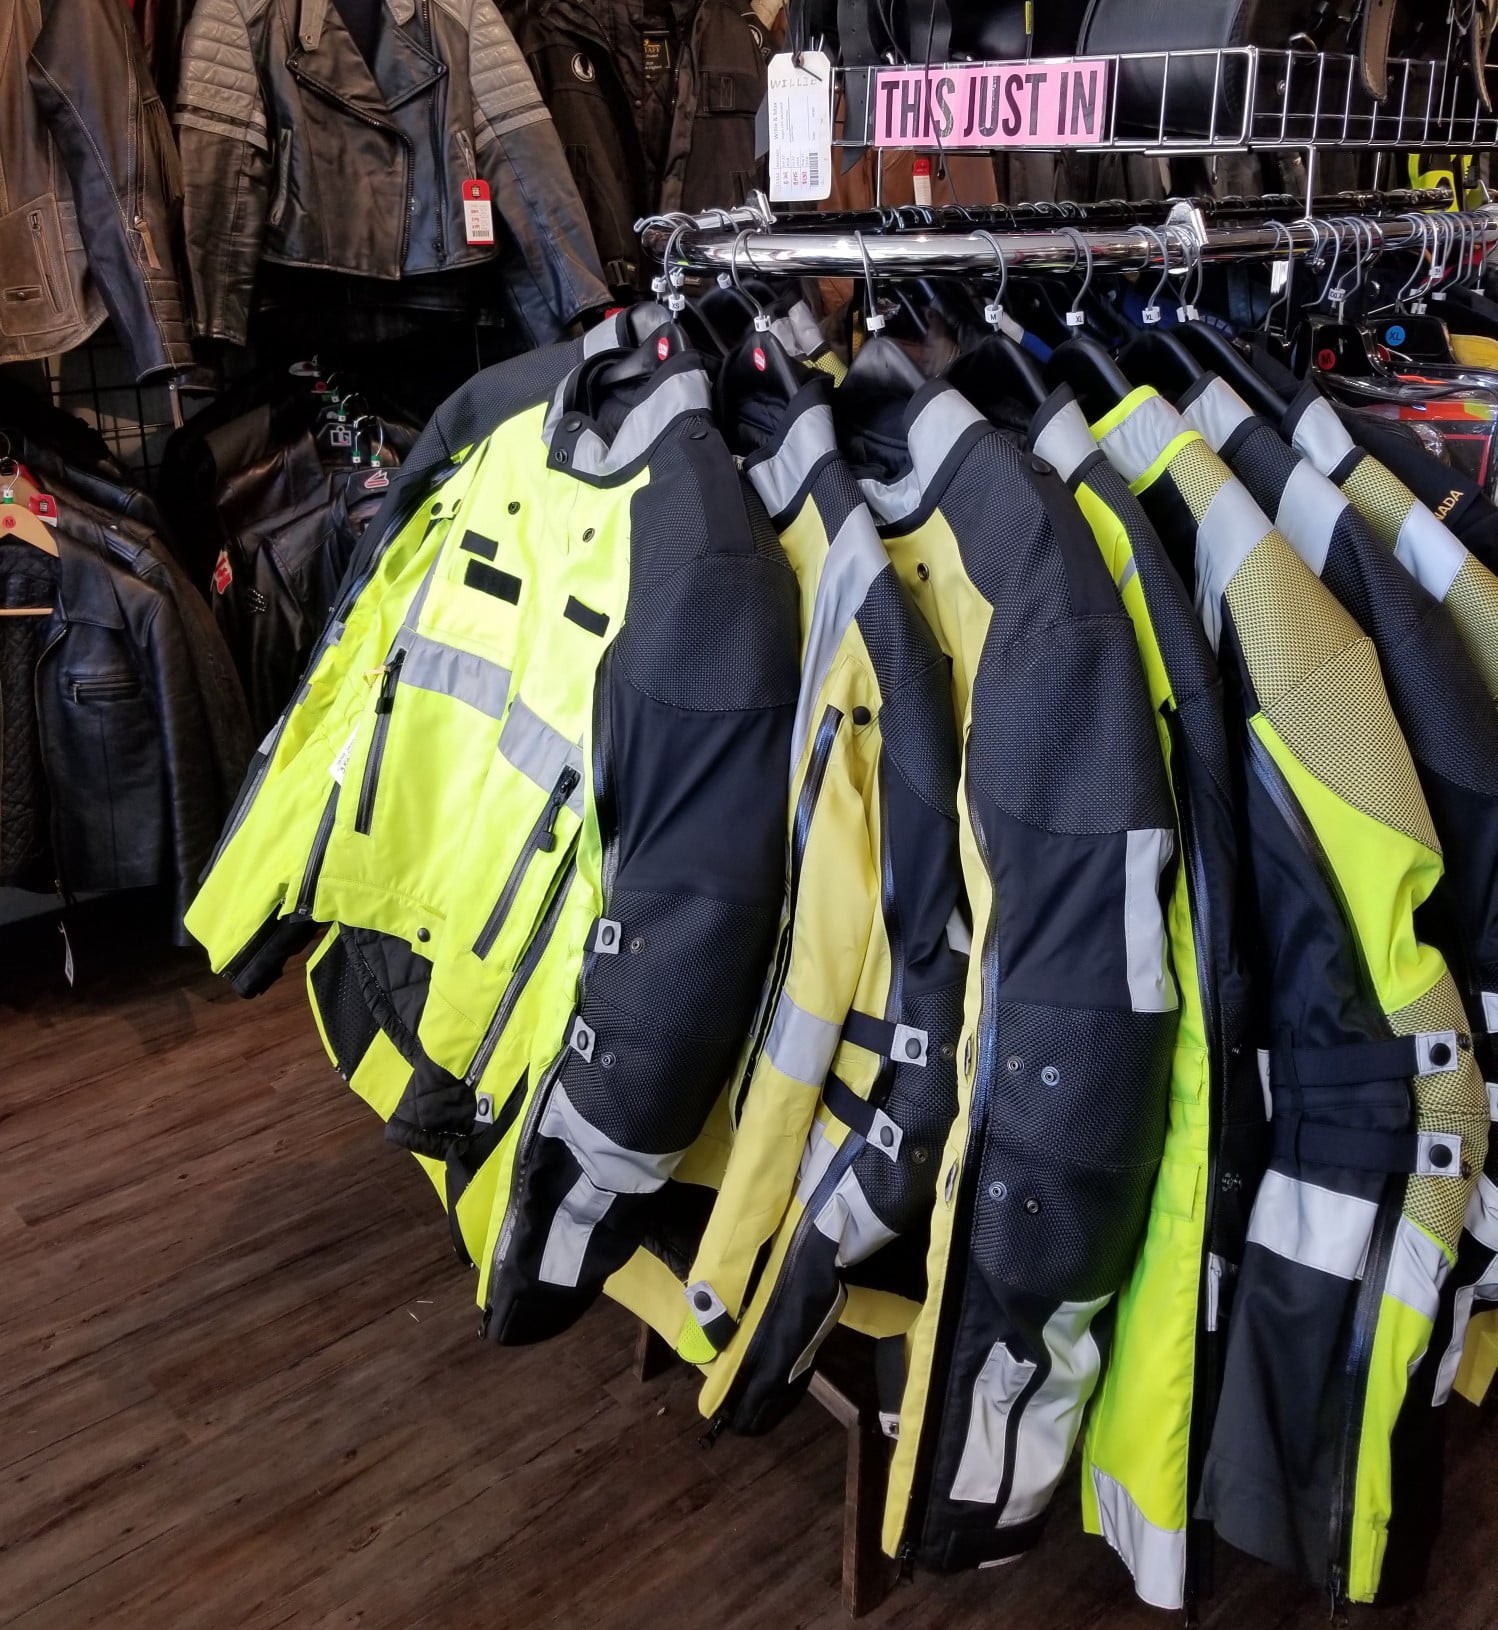 Textile waterproof police-style jackets